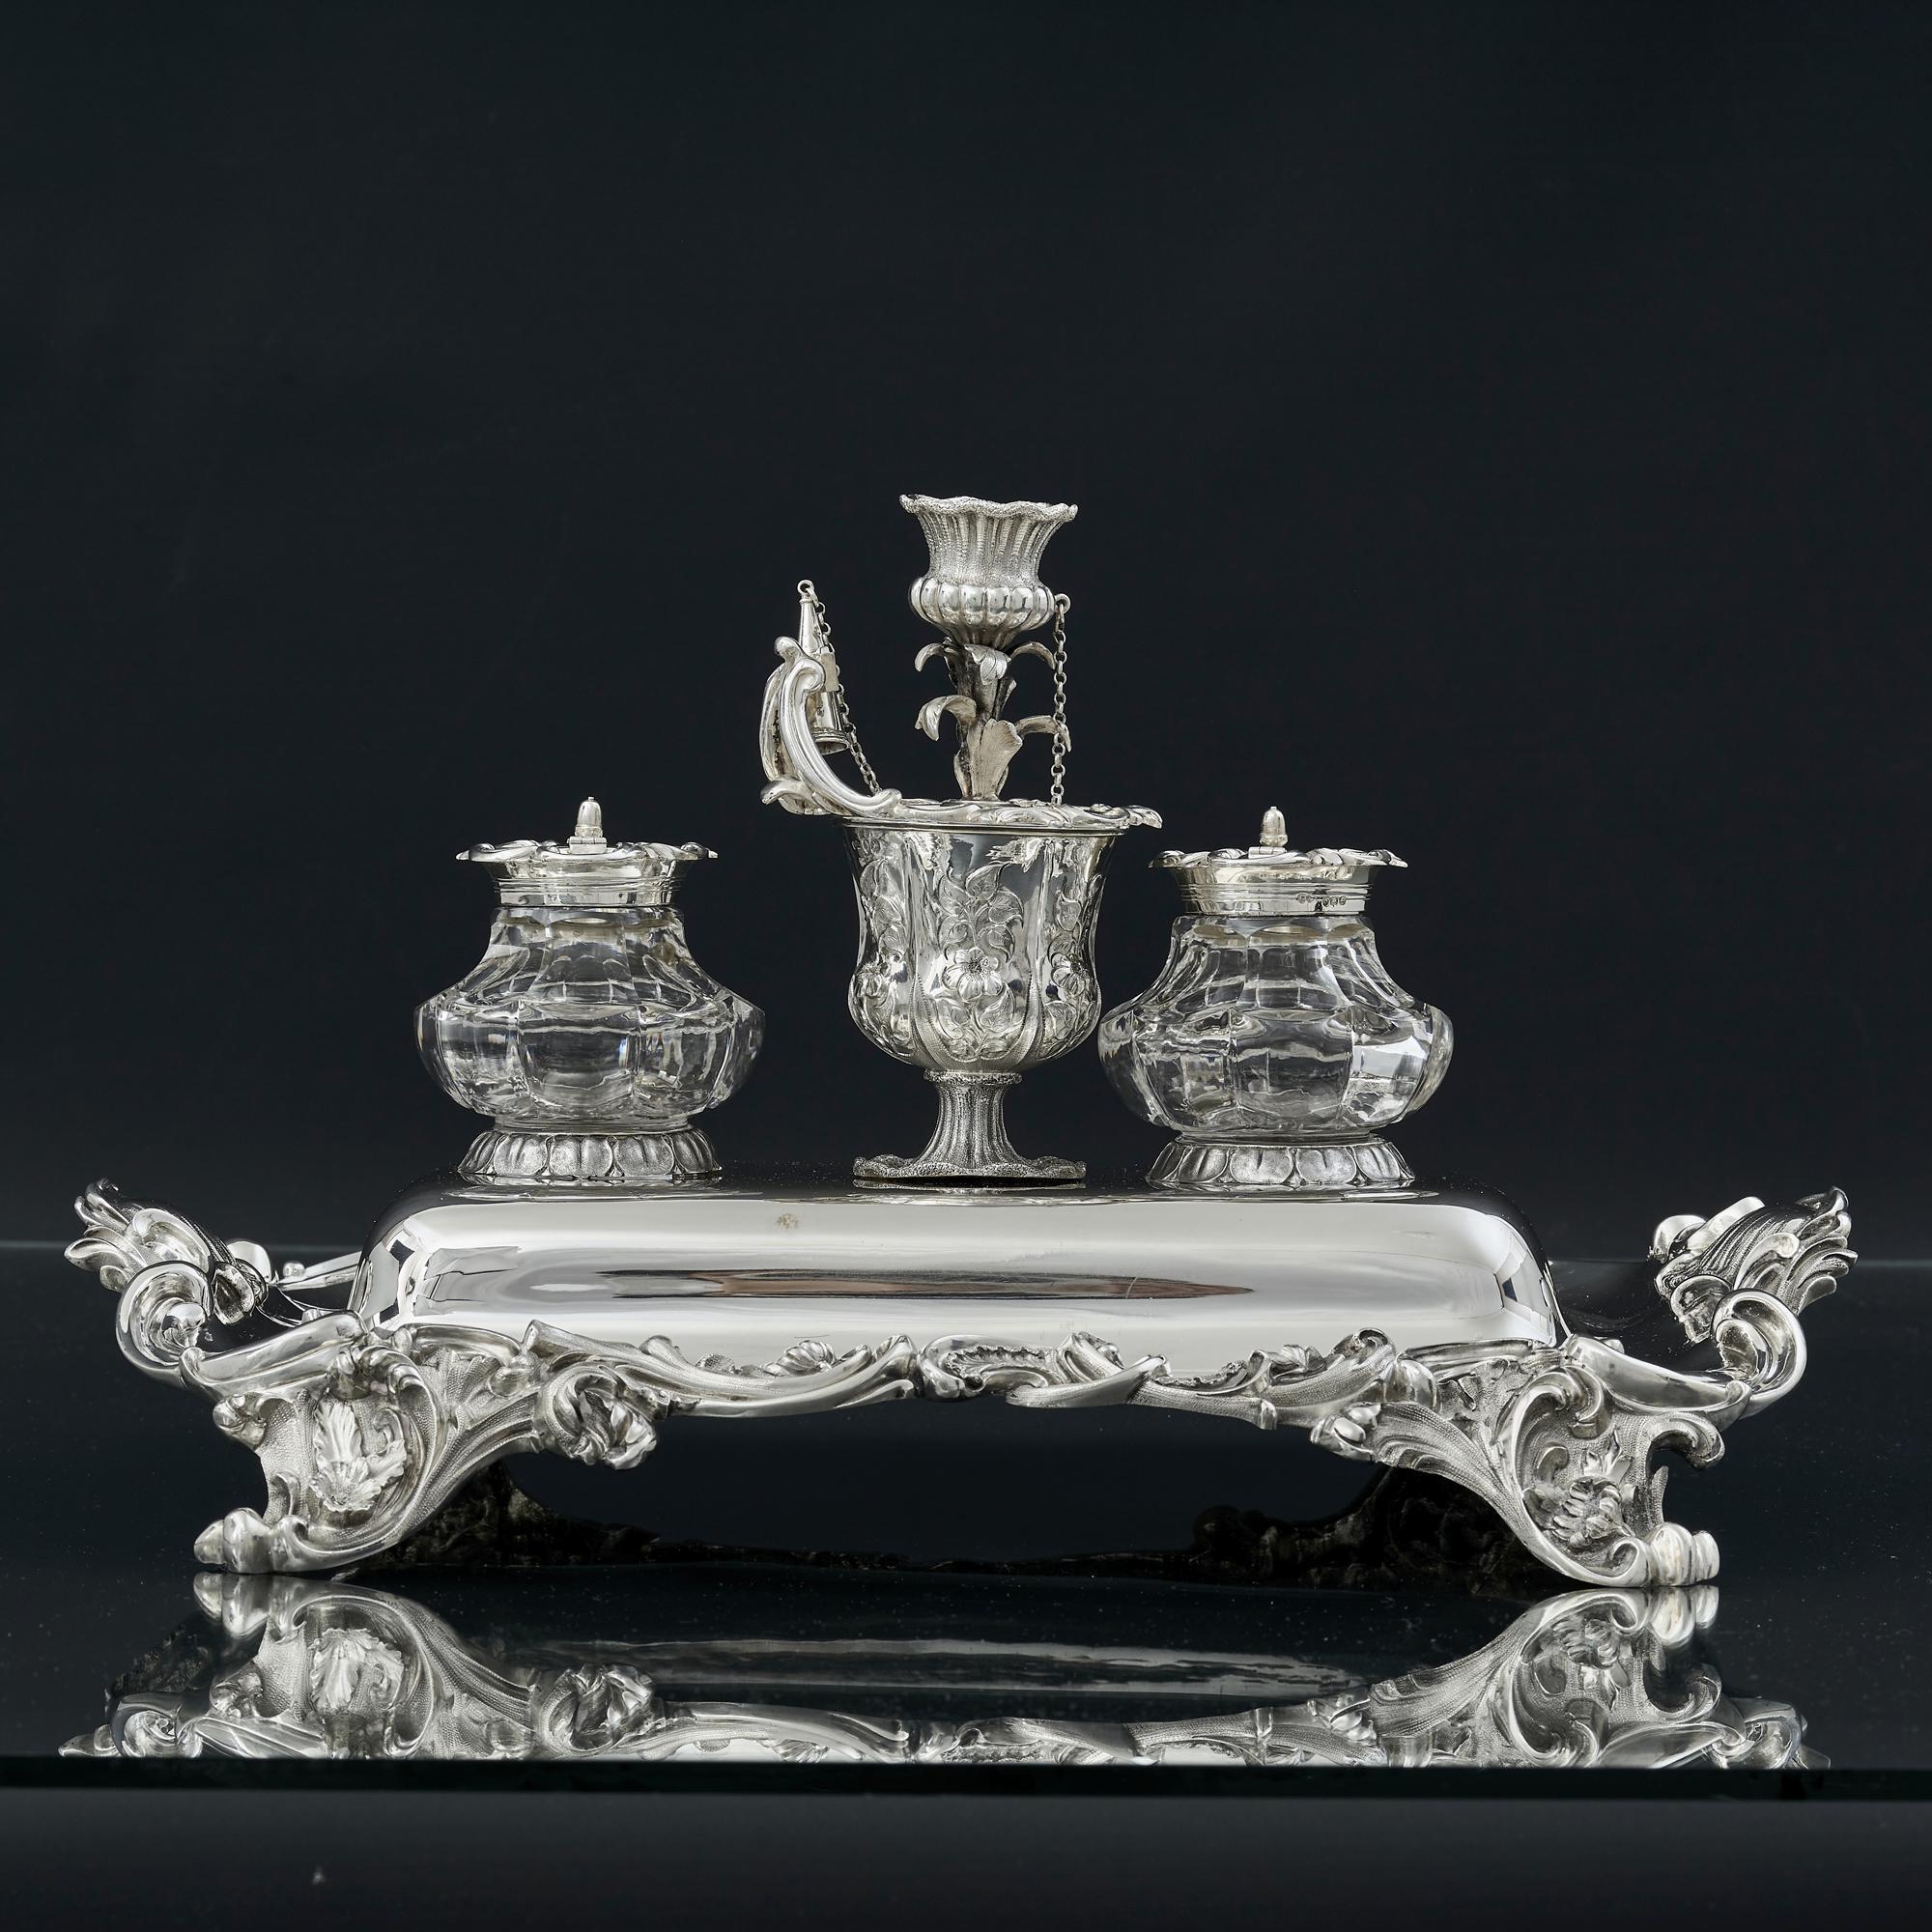 Antique silver inkstand of impressive proportions, made at the end of King William IV's reign. The inkstand has finely detailed scroll and leaf pattern cast mounts and rets on four scroll leaf and flower supports. 

Both inkwells are fitted with